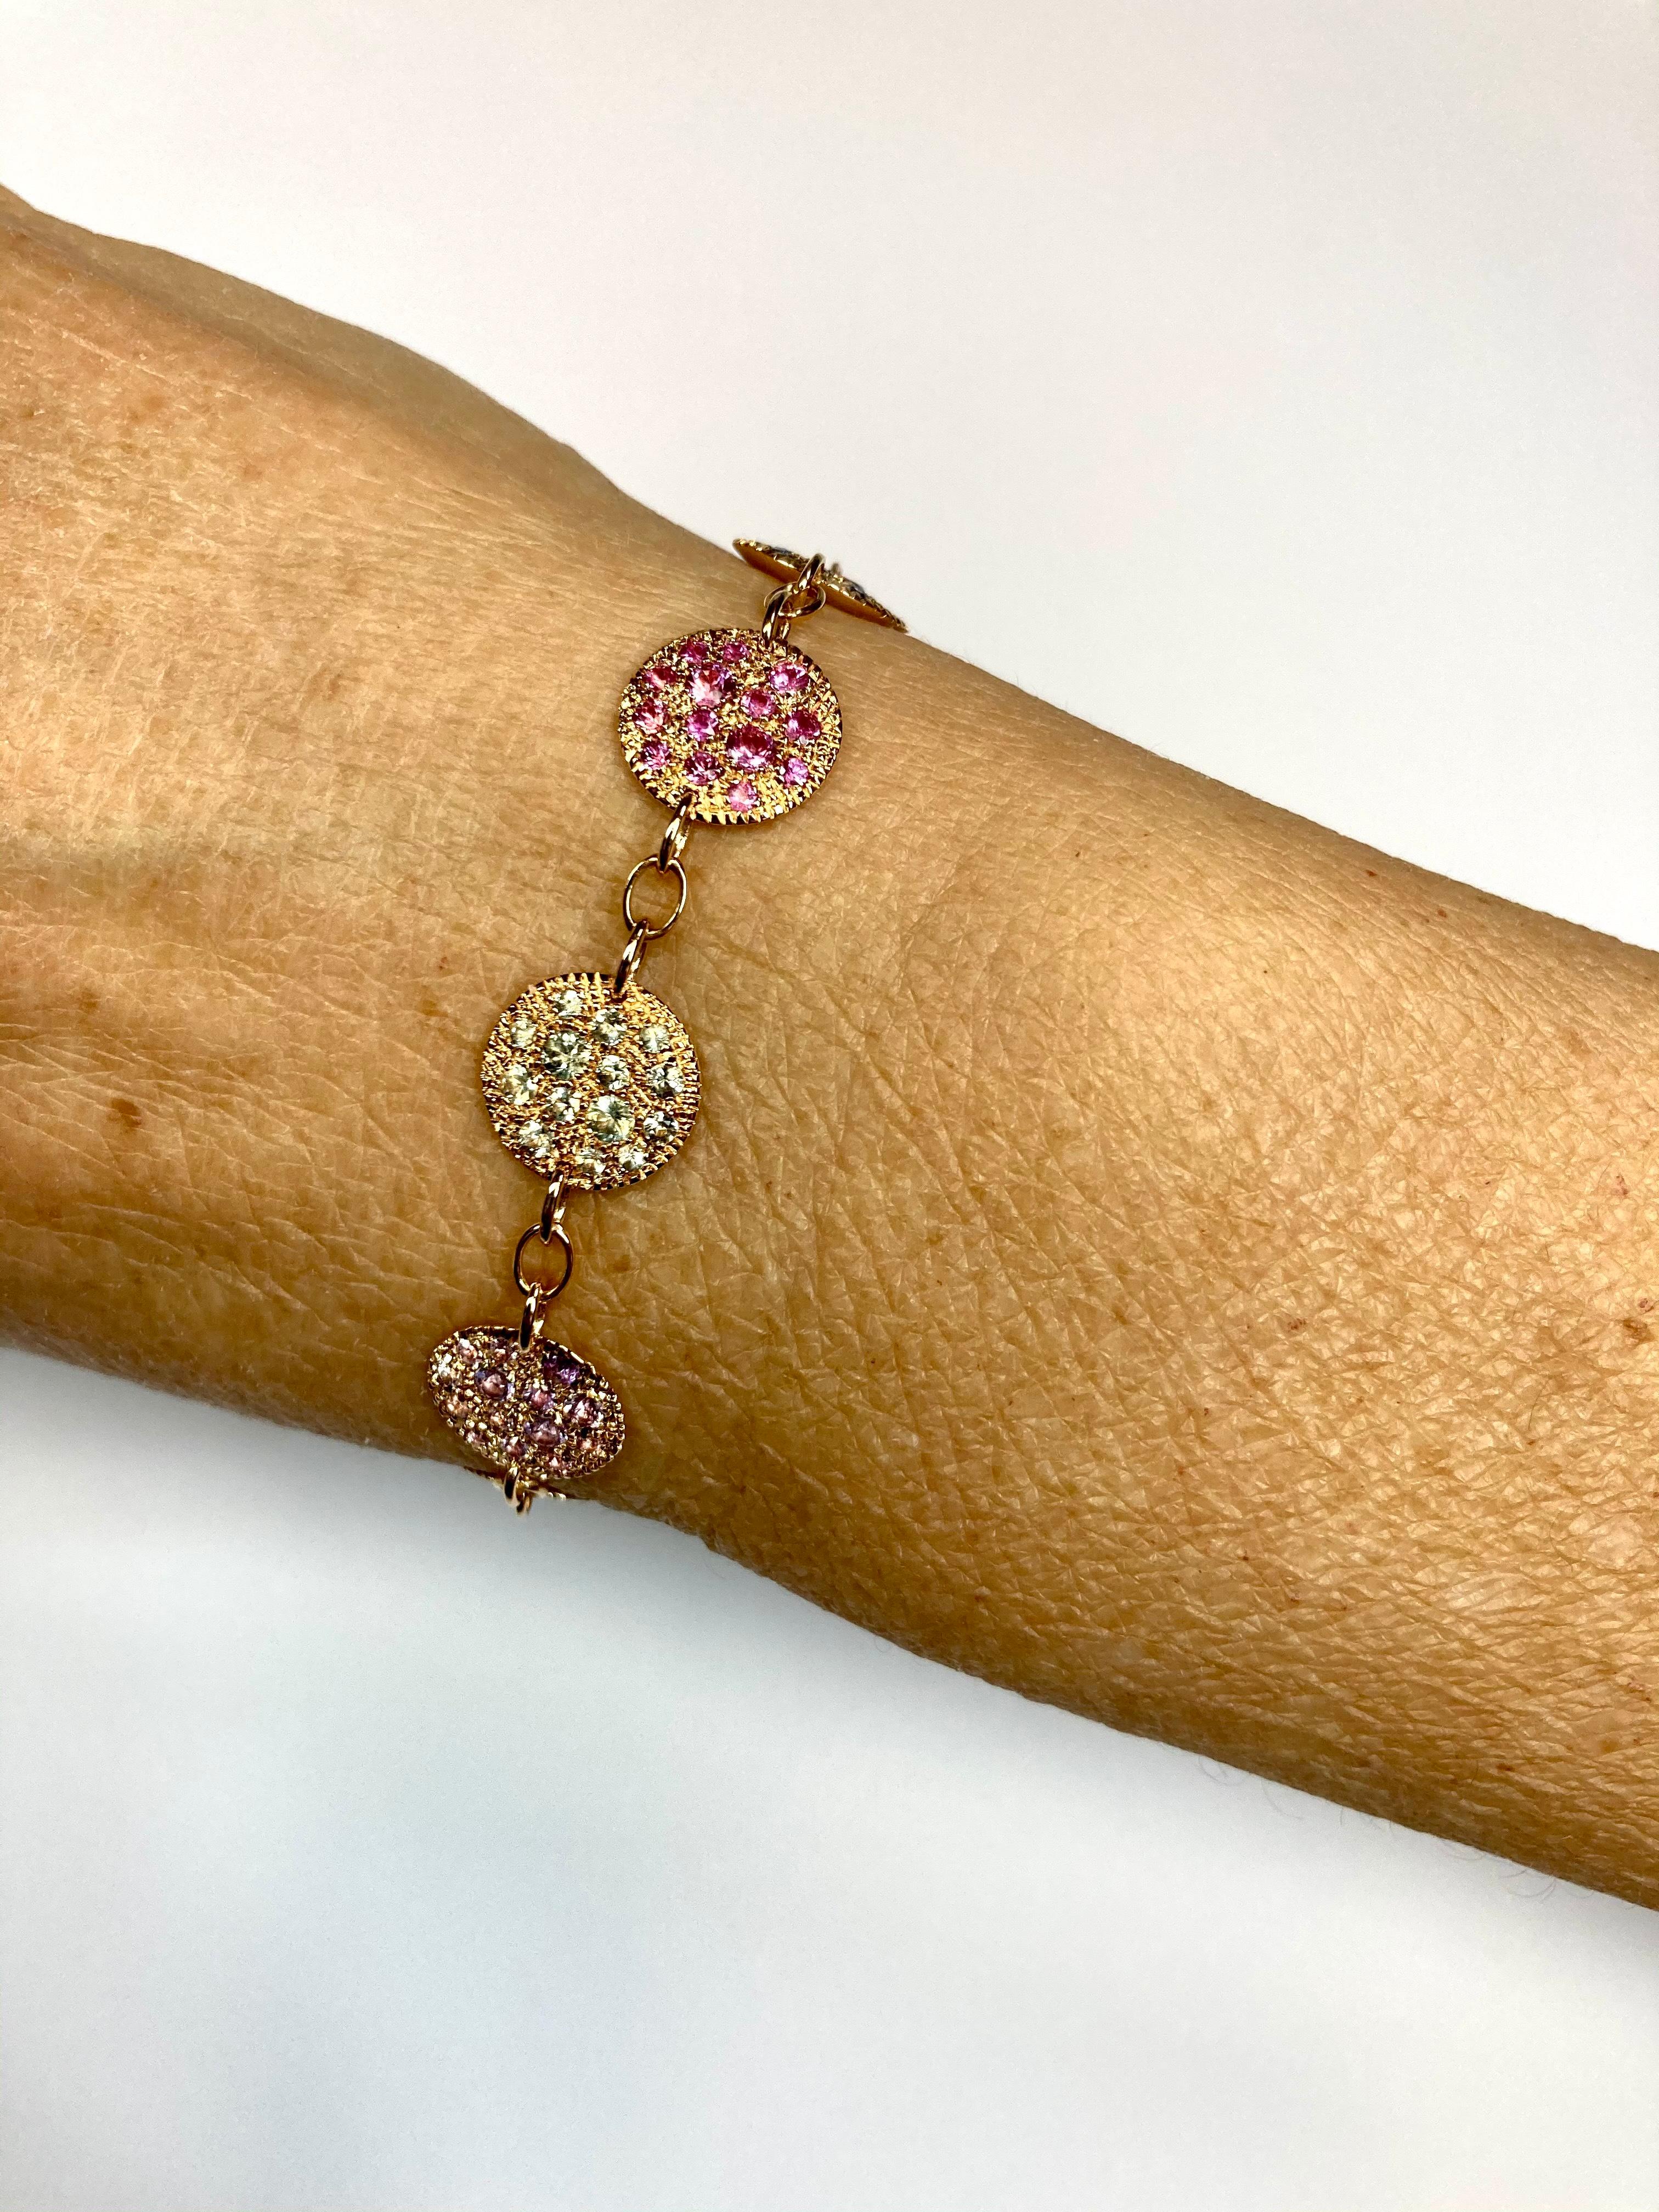 Timeless elengat Rose Gold Bracelet, with Multicolor Sapphires (Rose, Purple, Green and Blue) ct. 5,77, Made in Italy by Roberto Casarin. 

A newly developed design among our collection, this colorful bracelet blends the beauty of Sapphires with the